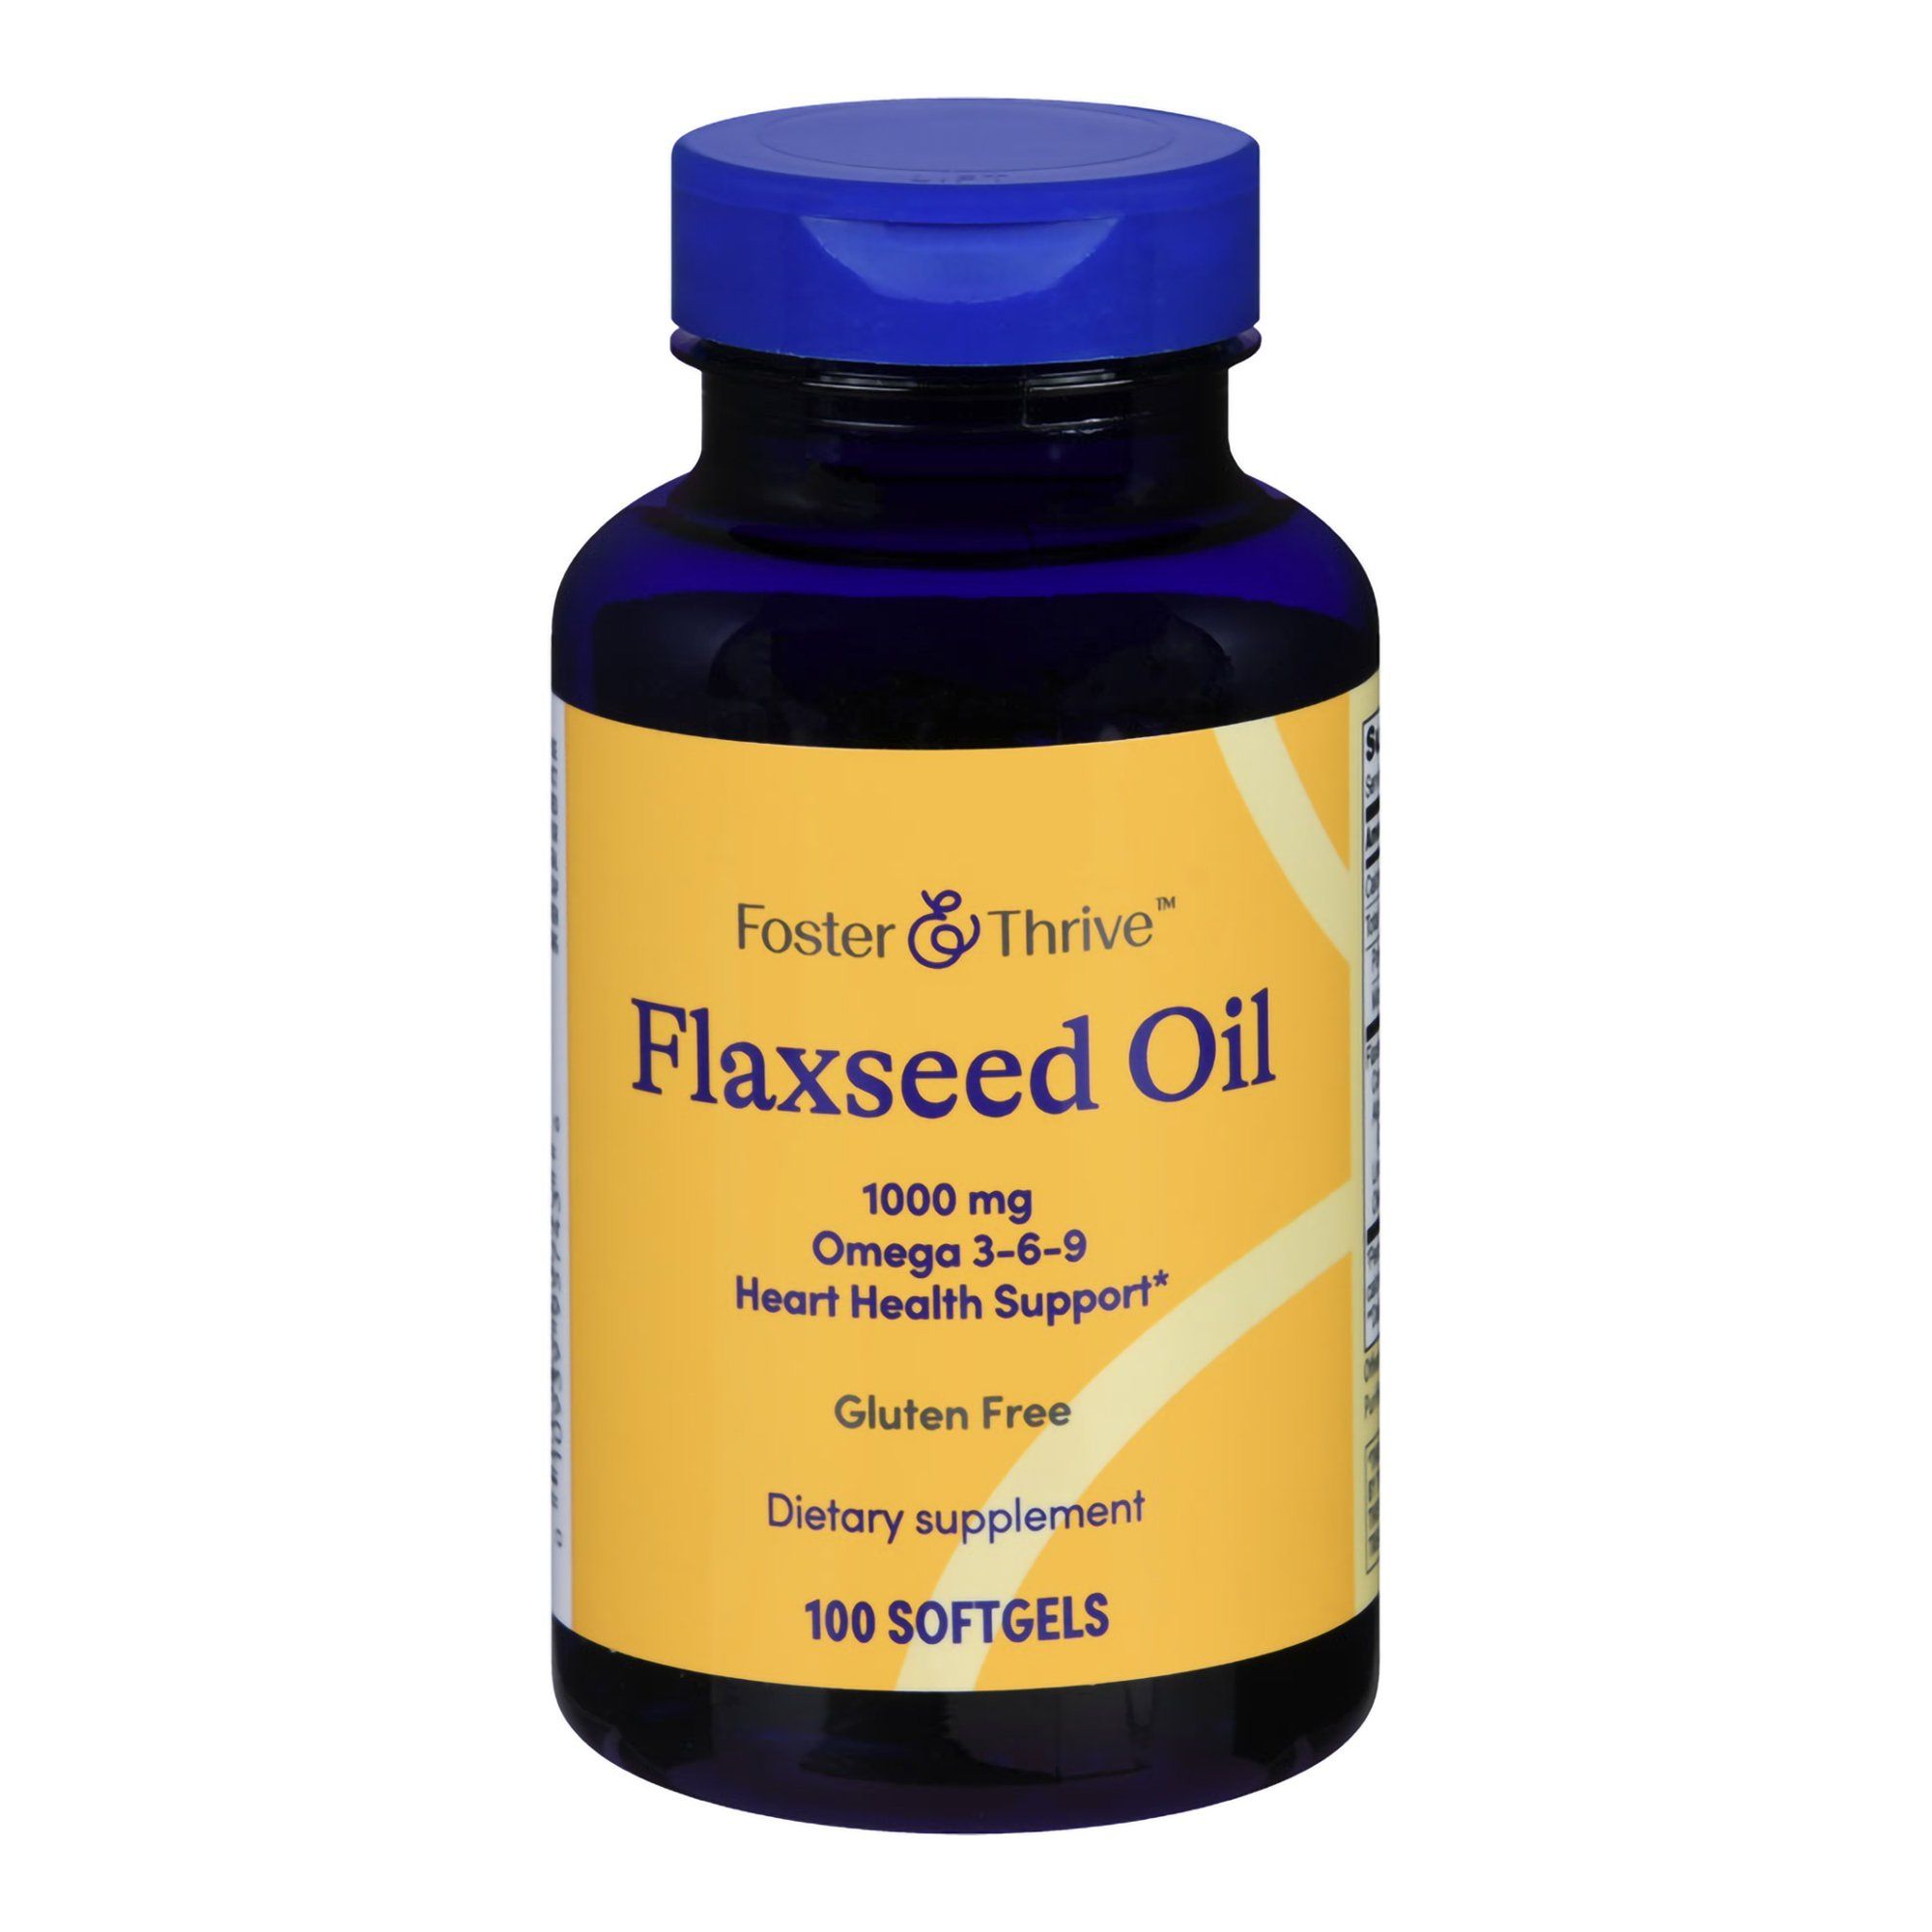 Foster & Thrive Flaxseed Oil Omega 3-6-9 Softgels, 1000 mg - 100 ct